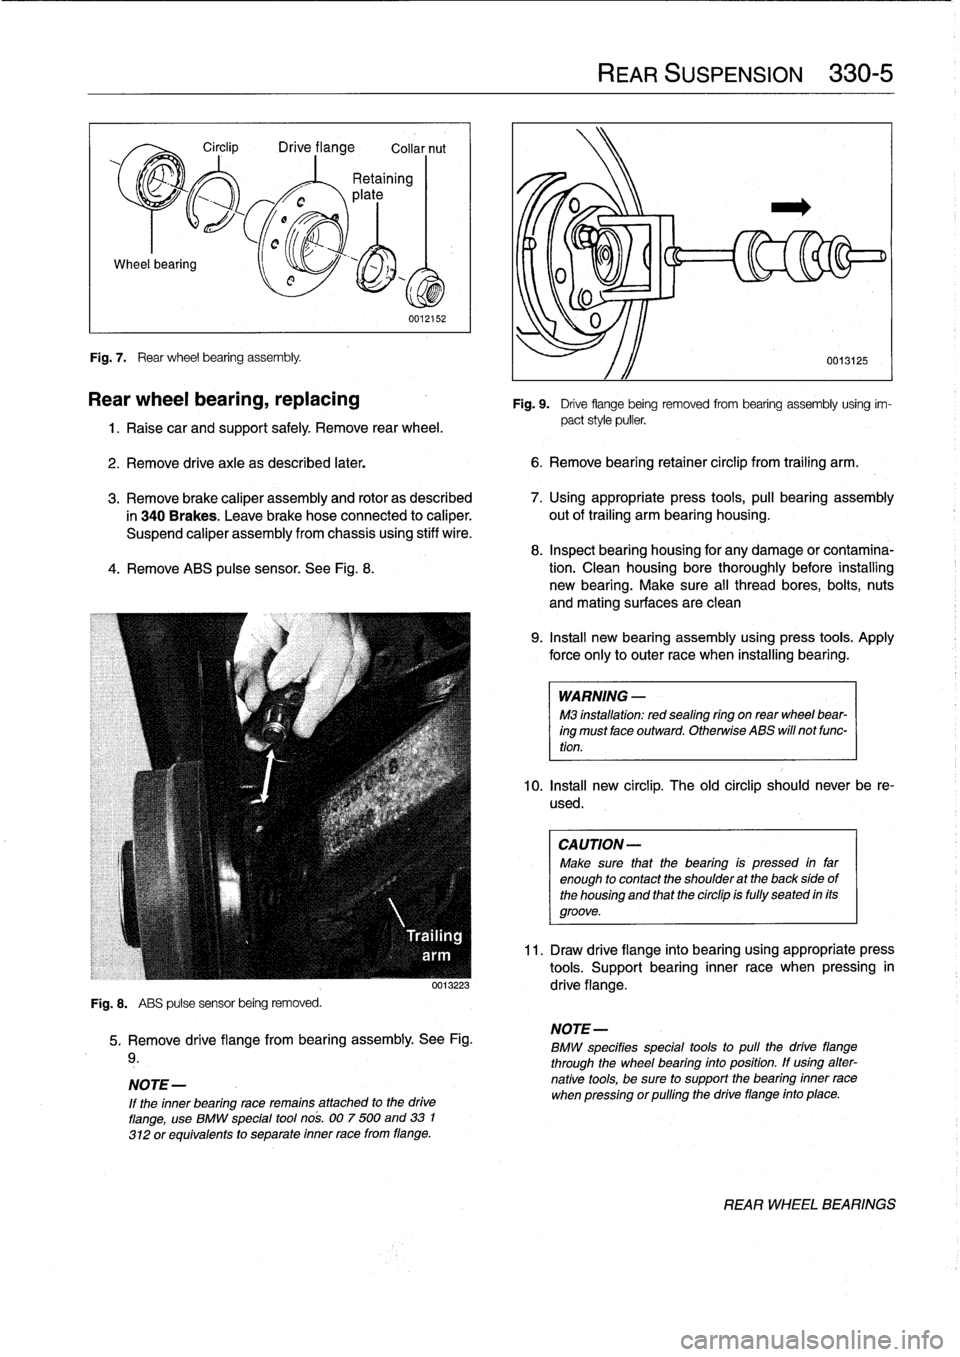 BMW M3 1993 E36 Owners Manual Wheel
bearing

Fig
.
7
.

	

Rear
wheel
bearing
assembly
.

Circlip

	

Drive
flange

	

Collar
nut

0012152

Rear
wheel
bearing,
replacing

1
.
Raise
car
and
support
safely
.
Remove
rear
wheel
.

2
.